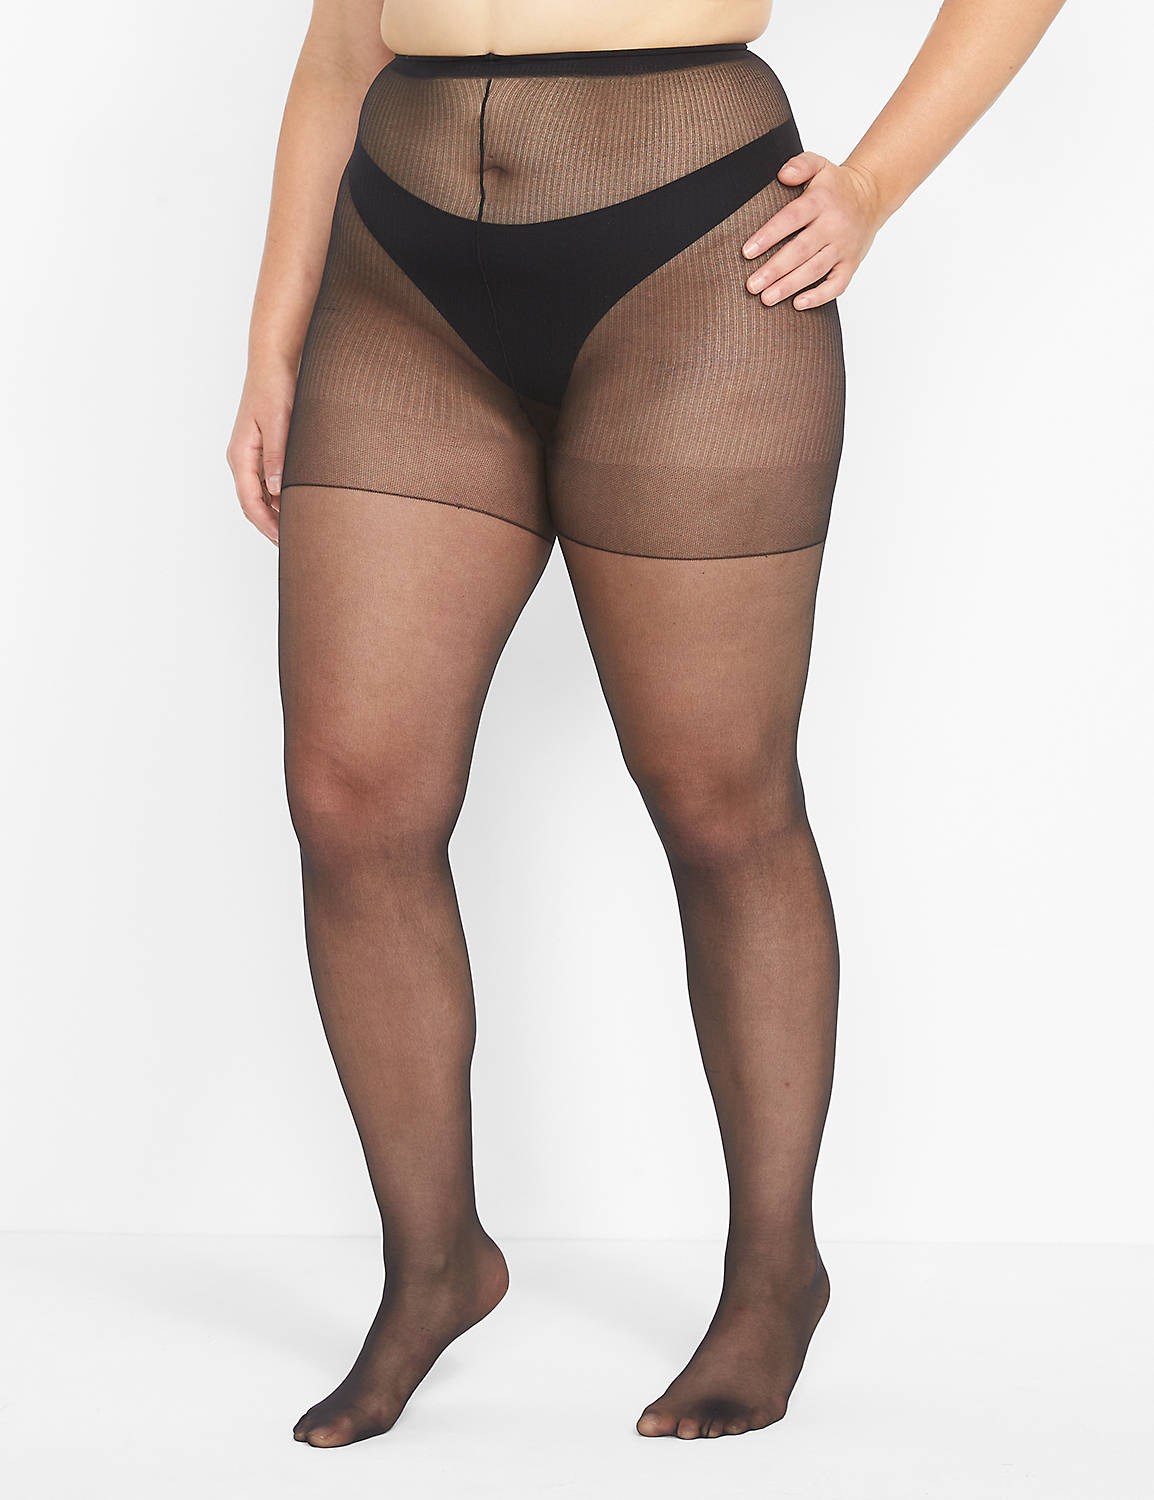 Day Sheer Tight Product Image 1